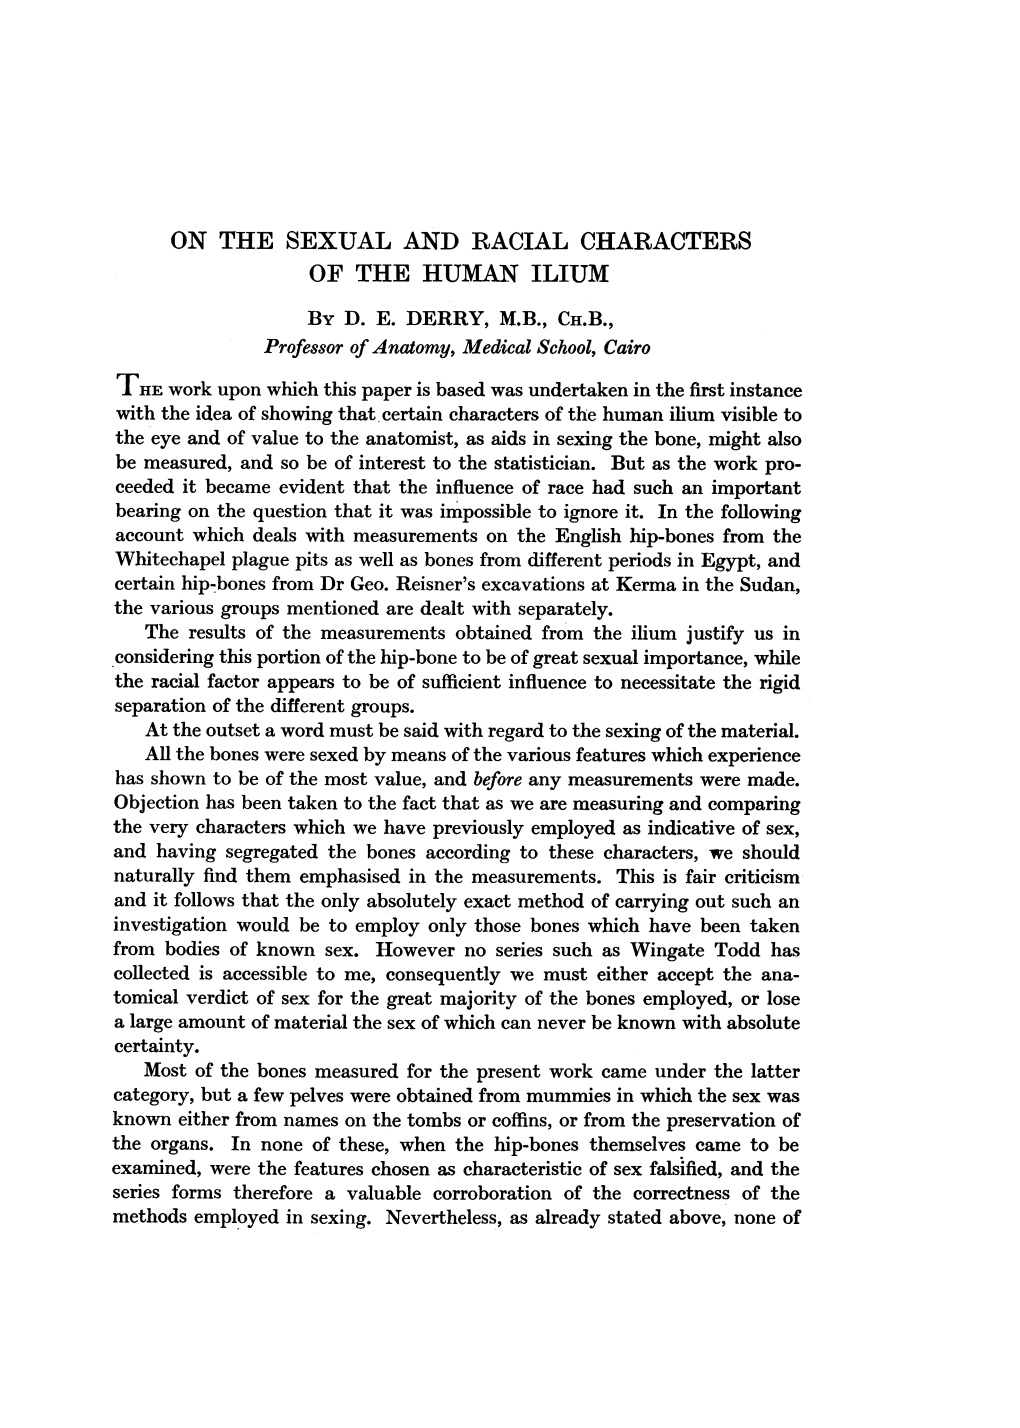 ON the SEXUAL and RACIAL CHARACTERS of the HUMAN ILIUM by D